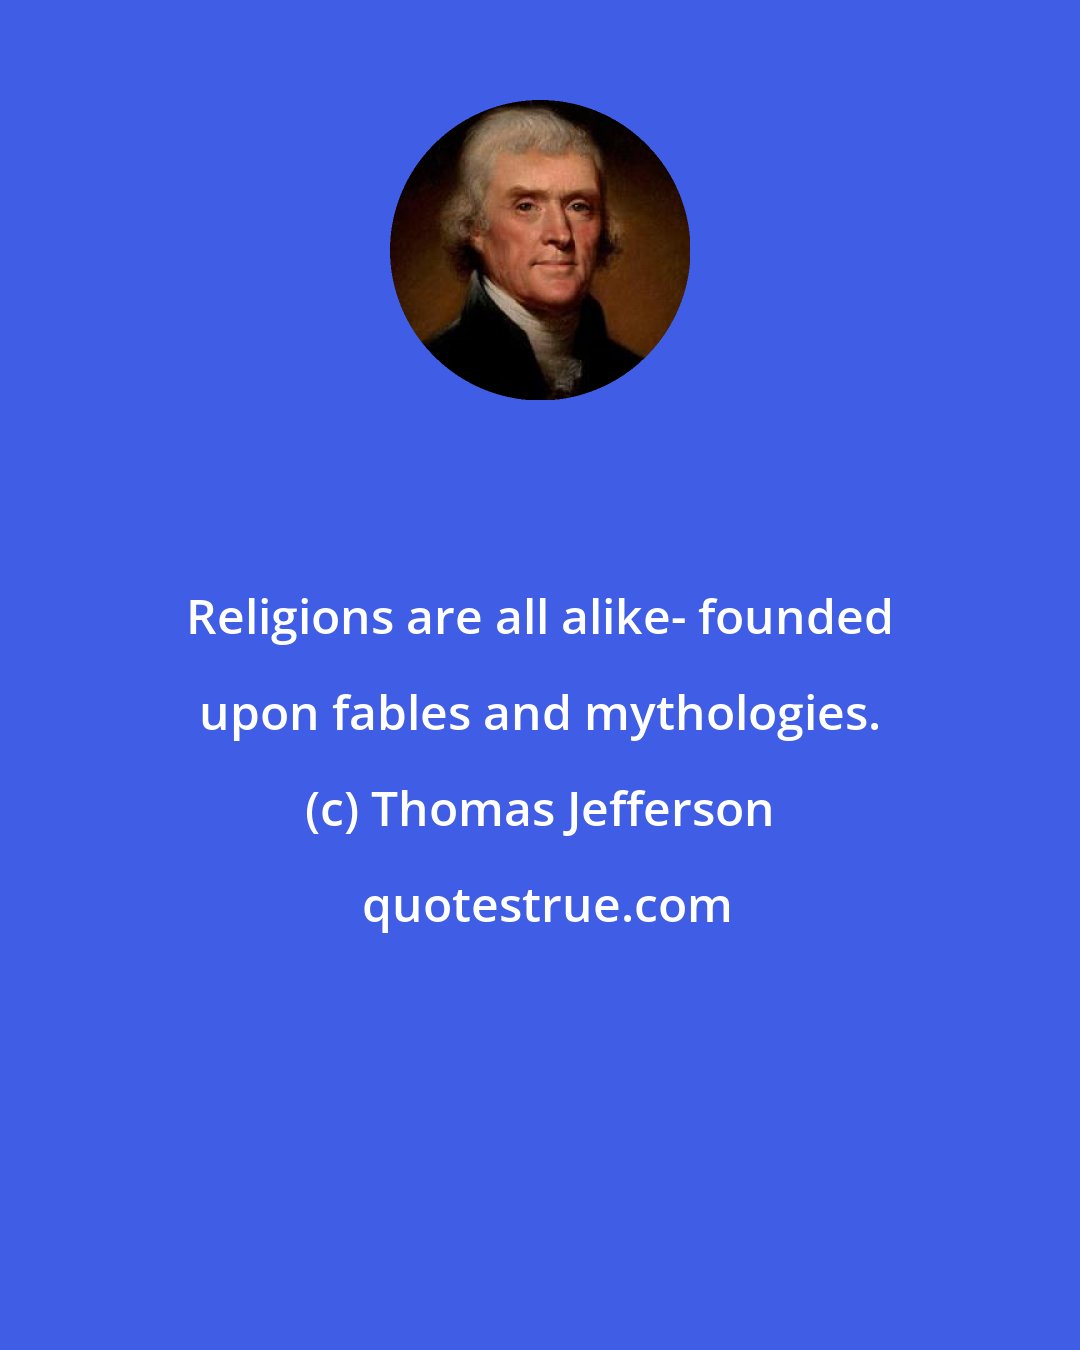 Thomas Jefferson: Religions are all alike- founded upon fables and mythologies.